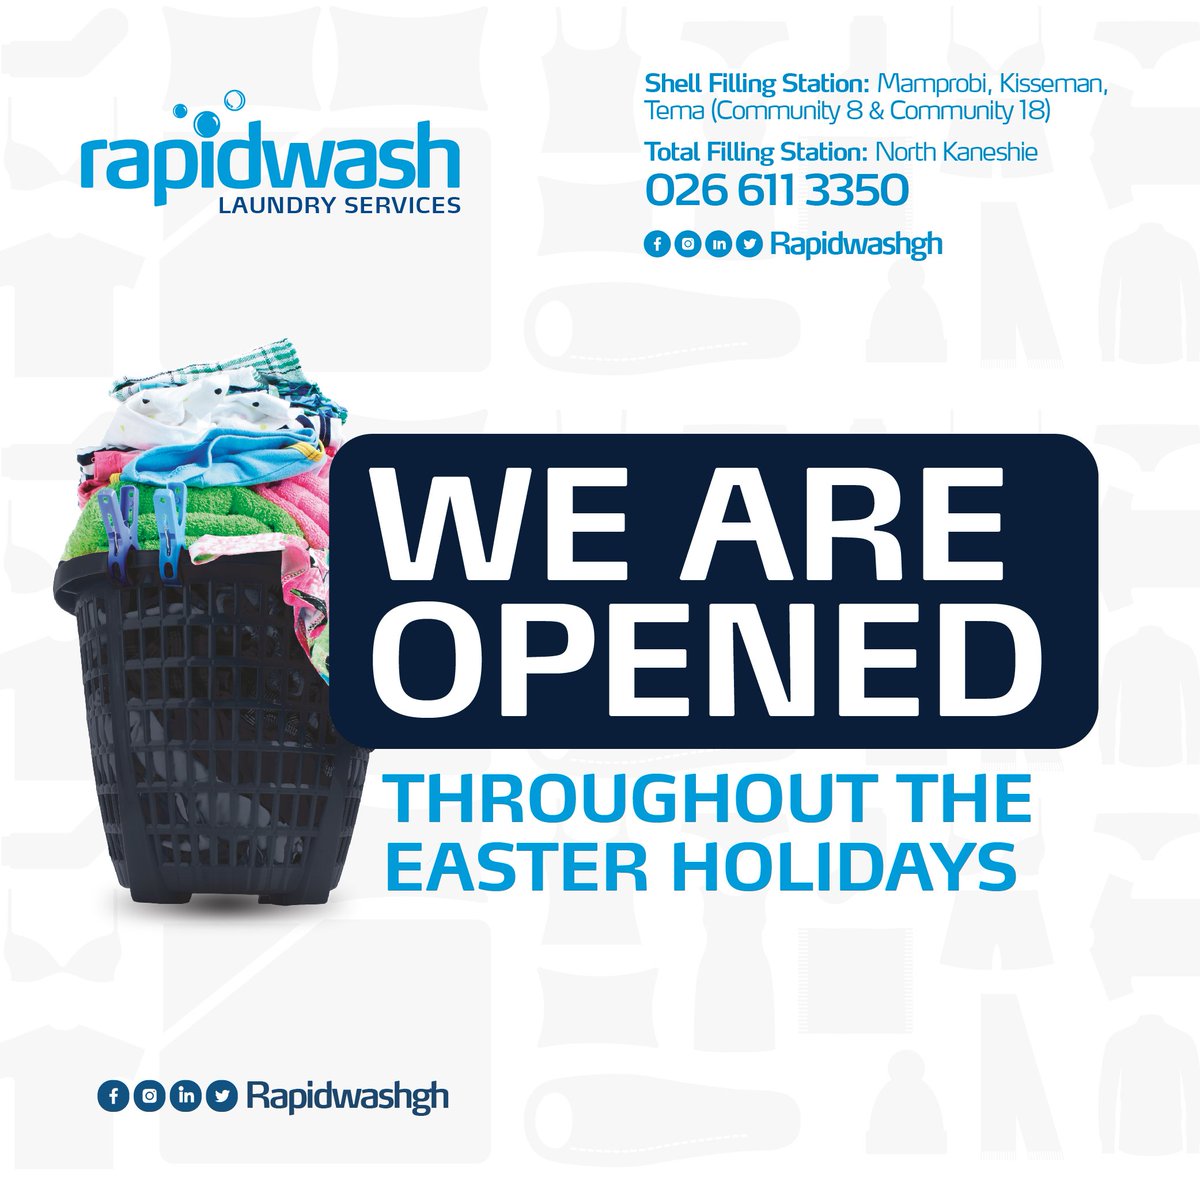 You got that right!
Tell a friend to tell a friend to tell another friend😉💃

Rapidwash laundry...wash more, worry less!

#rapidwashtrain #washmoreworryless #shellfillingstation #totalfillingstation #ghana #laundryservice #easter #affordable #convenient #nearyou